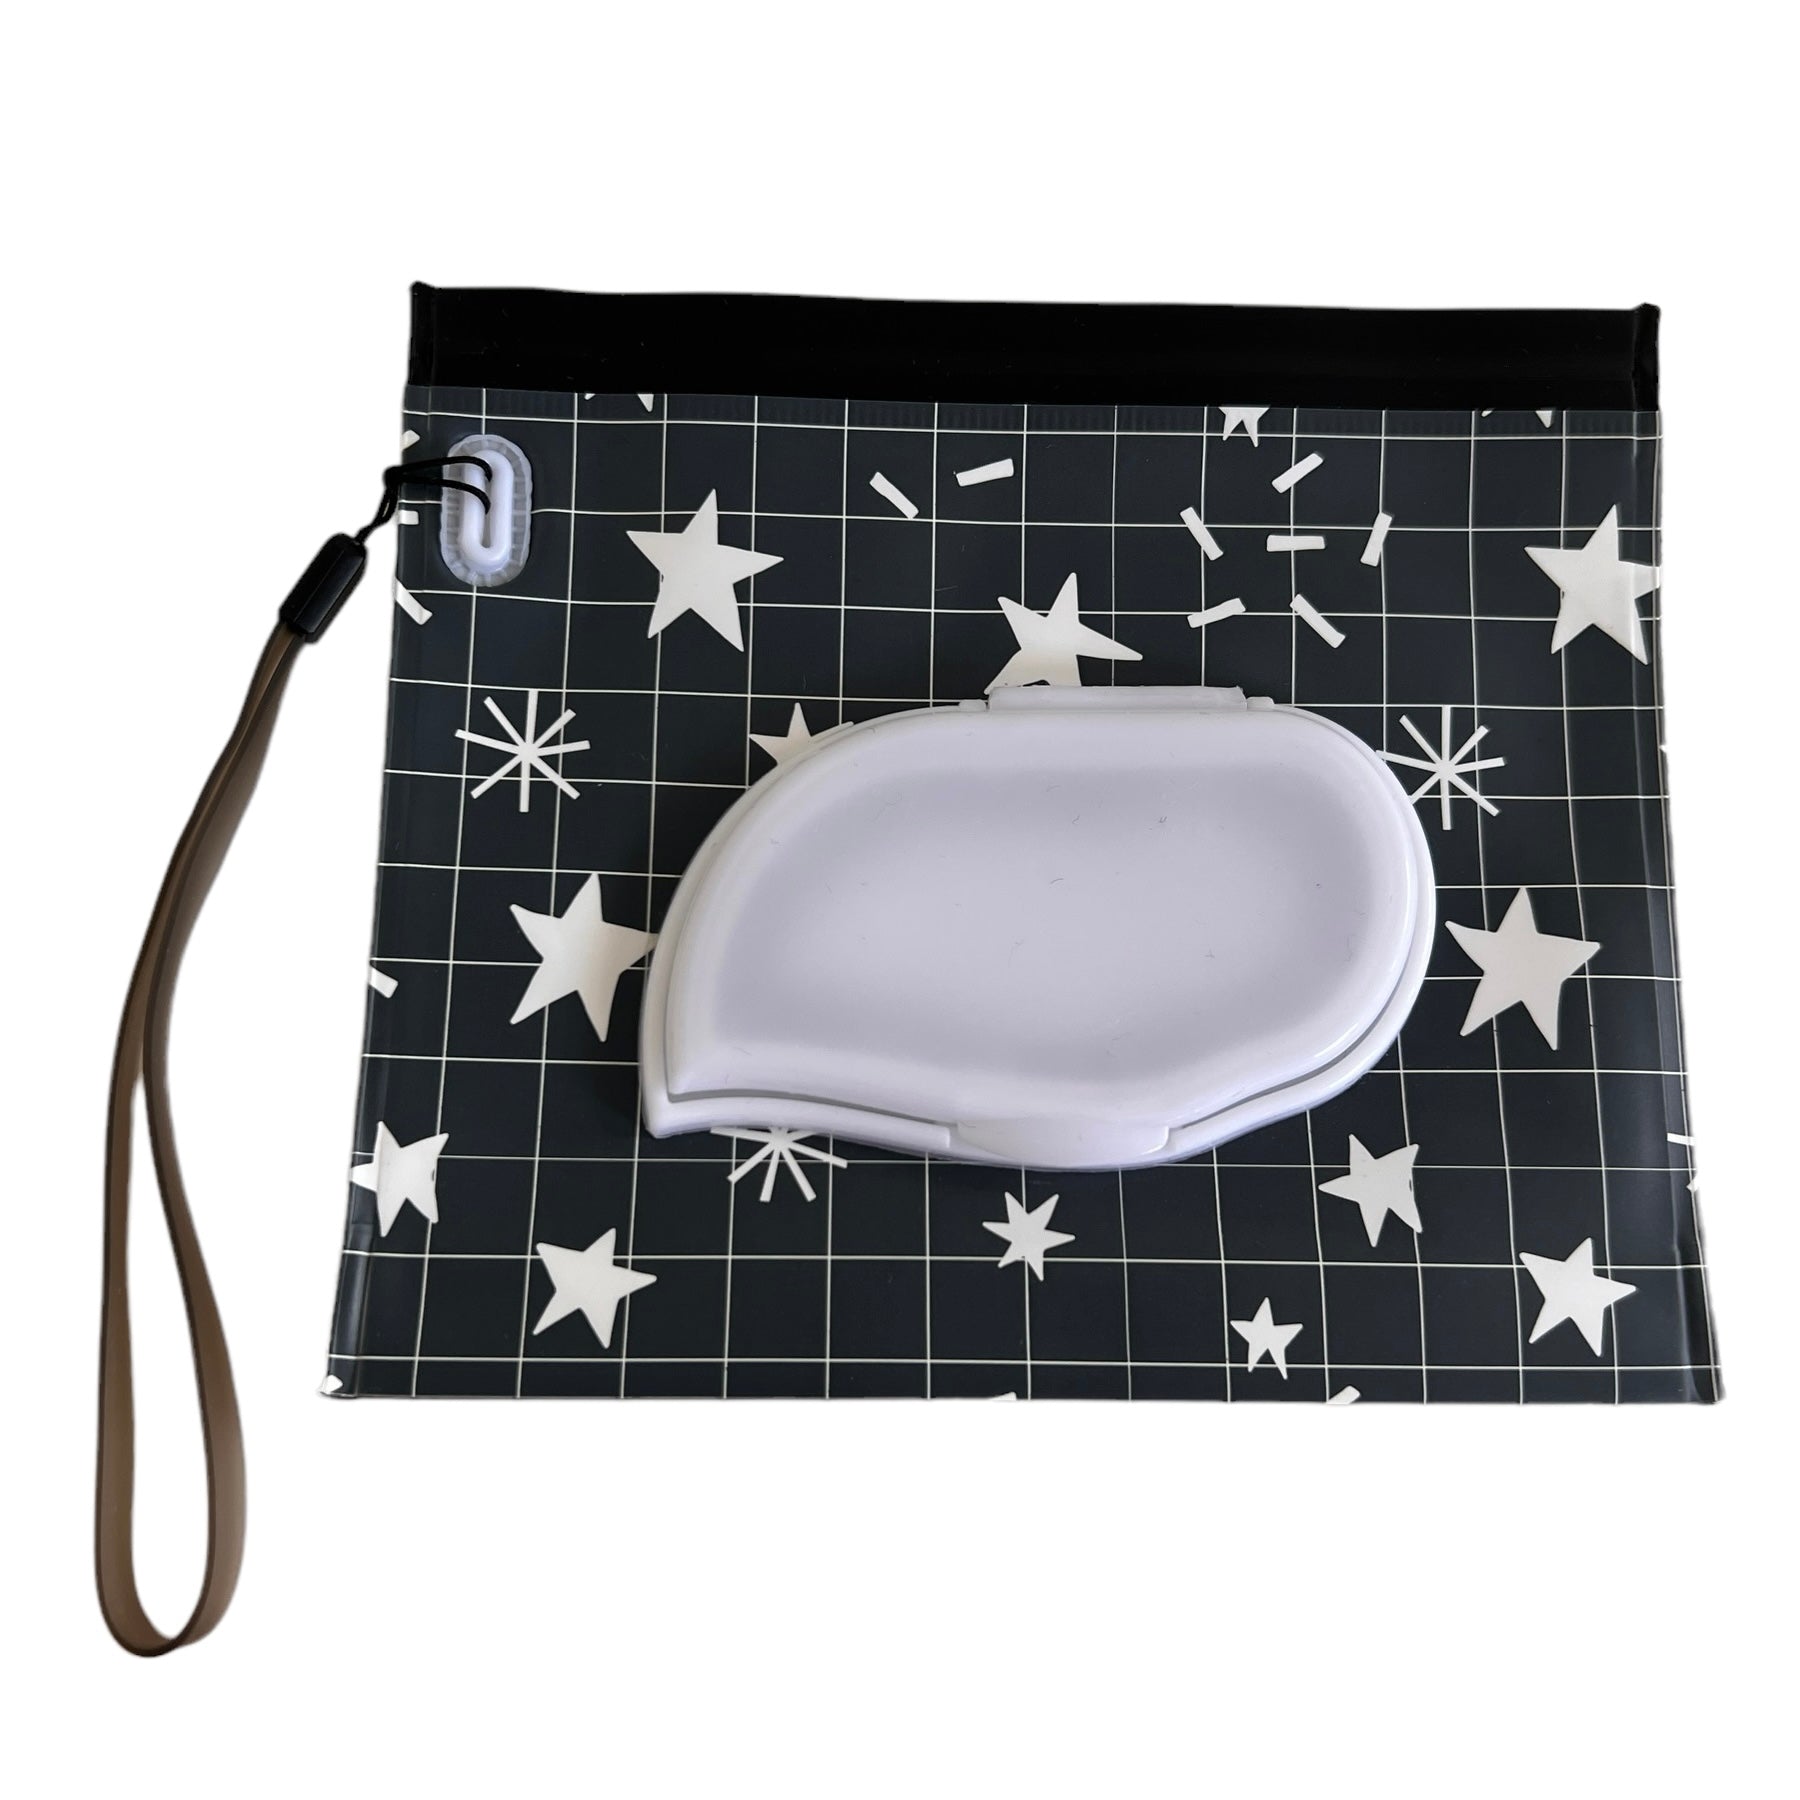 Wet Wipes Travel Potable (Could be called Reusable Wet Wipe Bag — Small Travel Pouches SPIRIT SPARKPLUGS Stars Black 